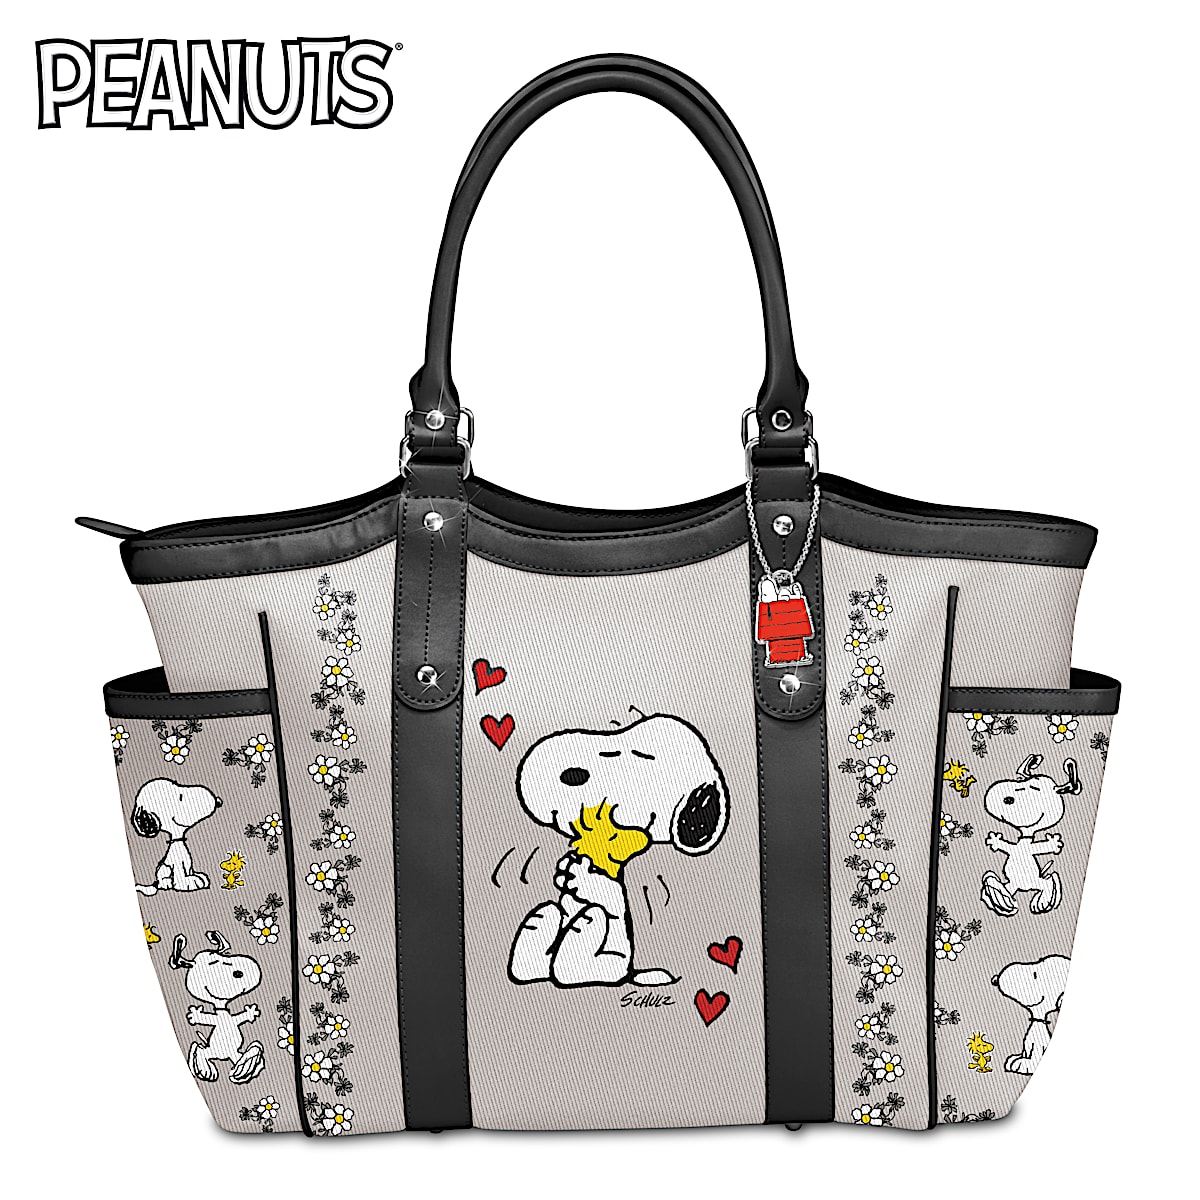 Snoopy Leather Tote Bag Snoopy And Friends Prints Handbag Birthday Gift